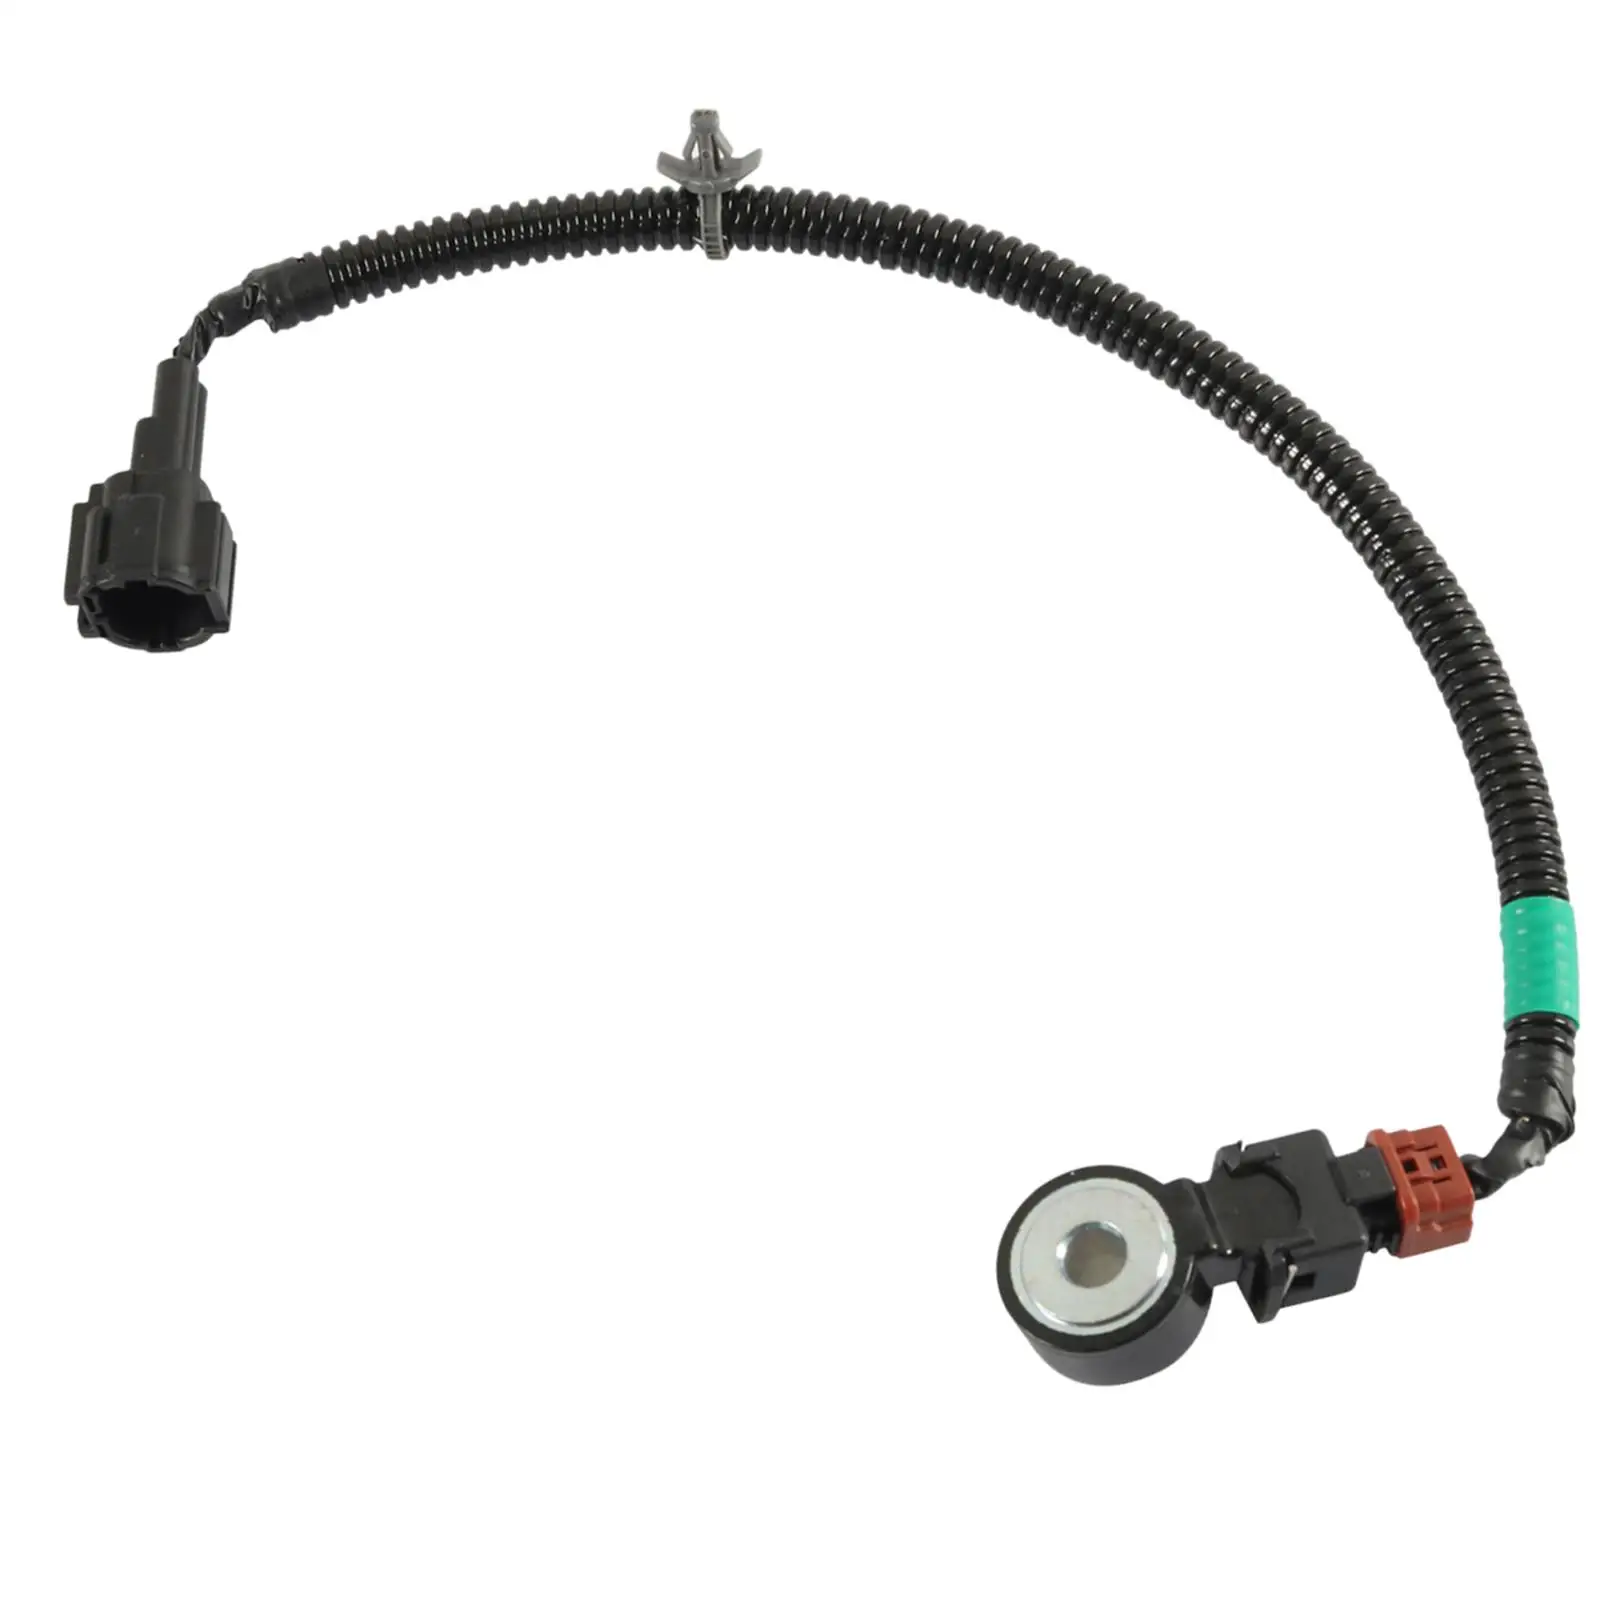 Knock Sensor and Wiring Harness 2407931U01 Fit for QX4 Replace Accessories